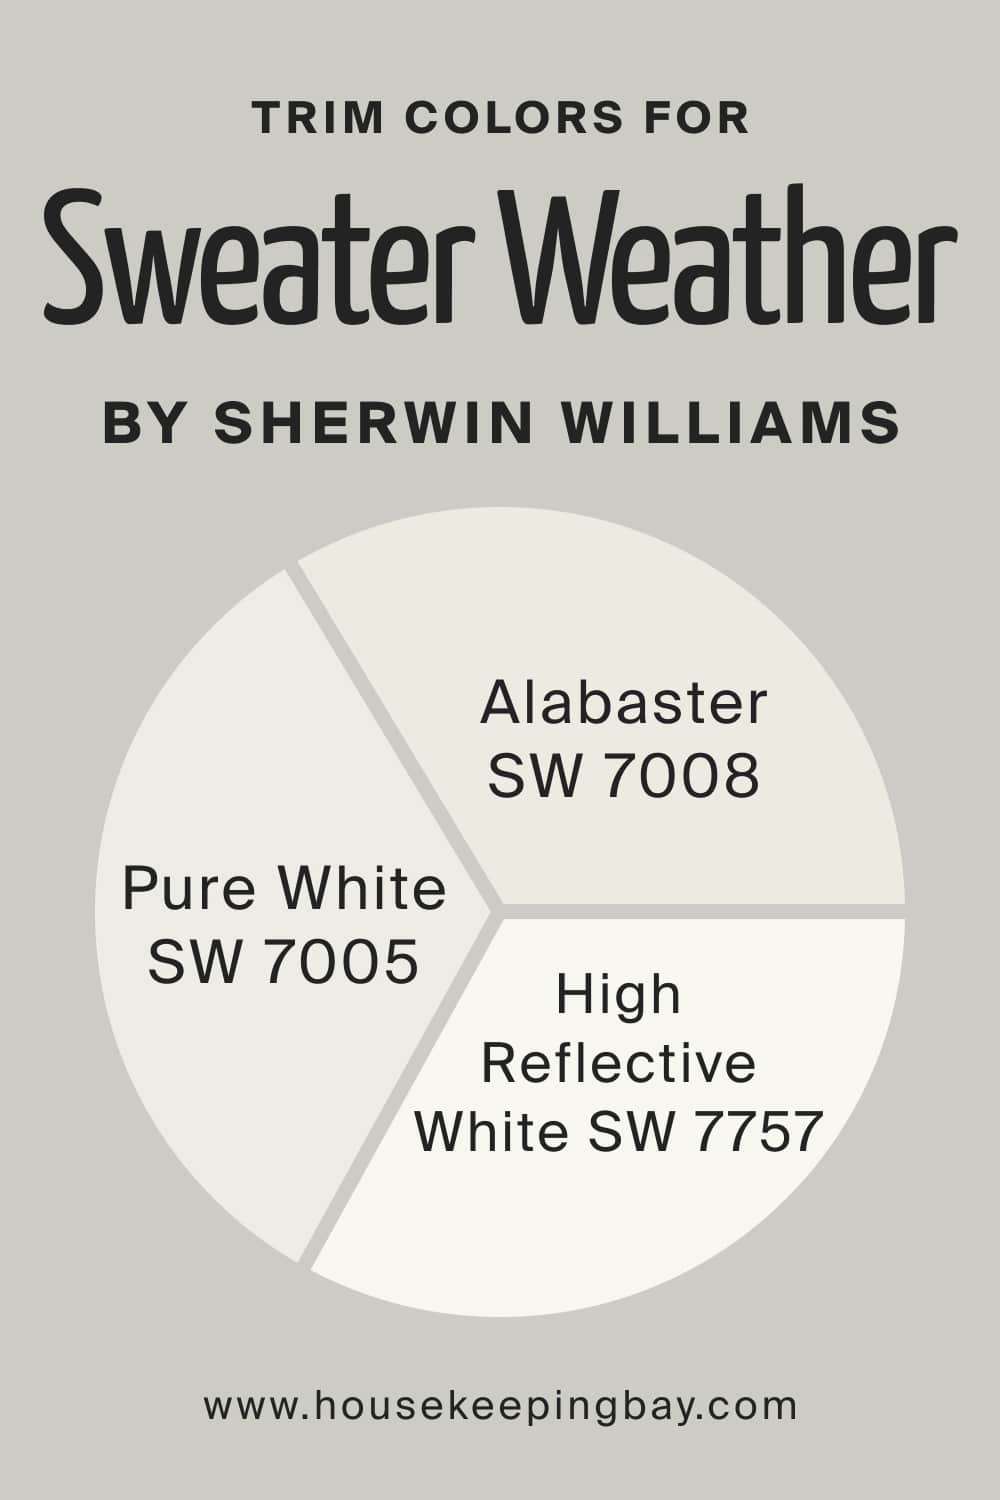 Trim Colors for Sweater Weather SW 9548 by Sherwin Williams